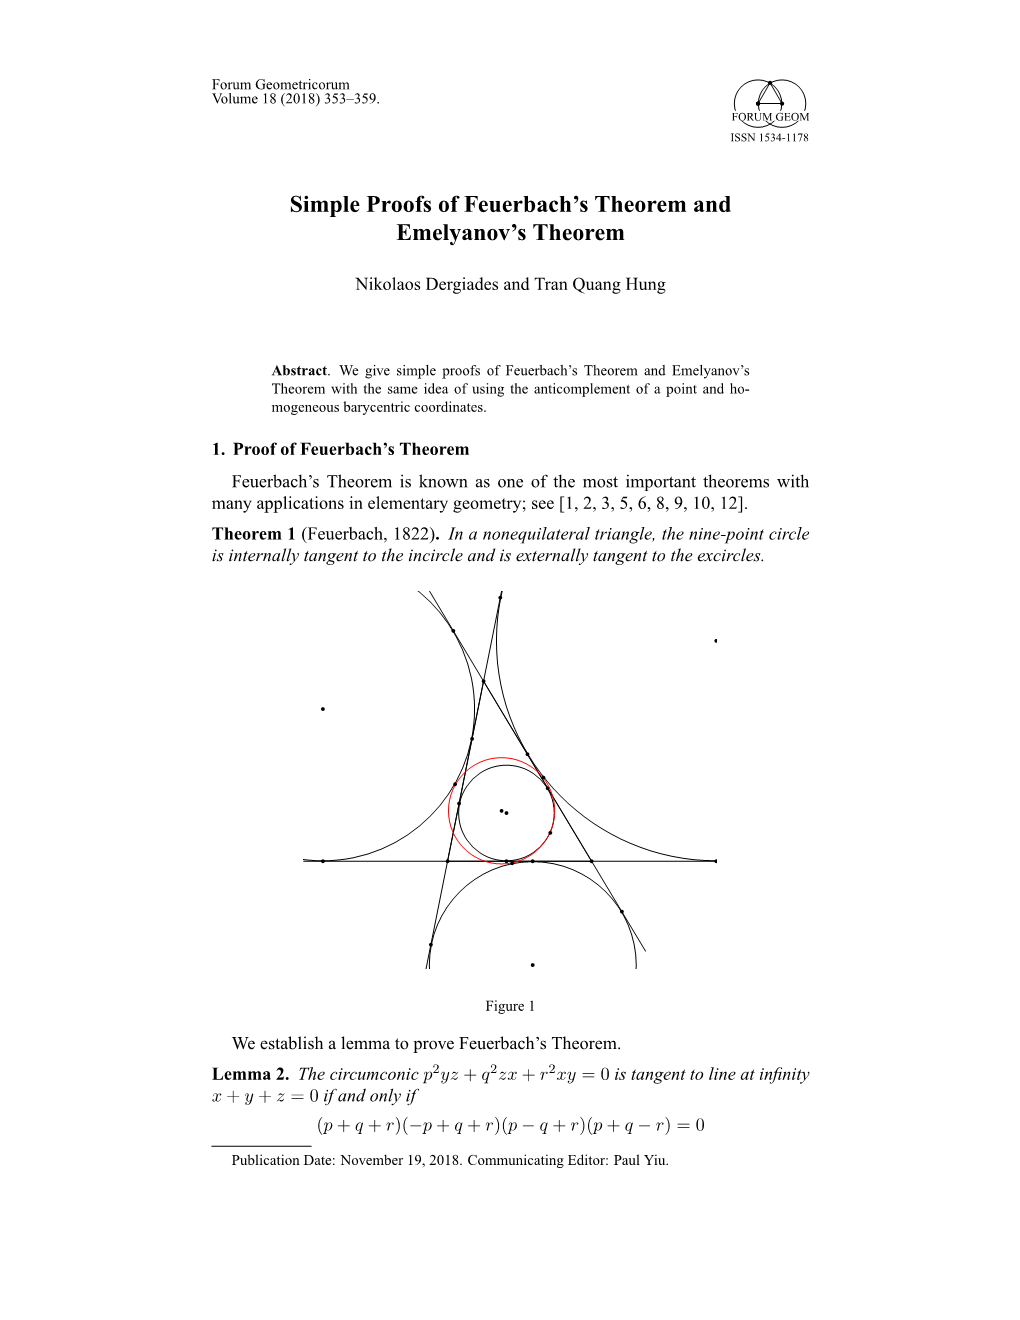 Simple Proofs of Feuerbach's Theorem and Emelyanov's Theorem